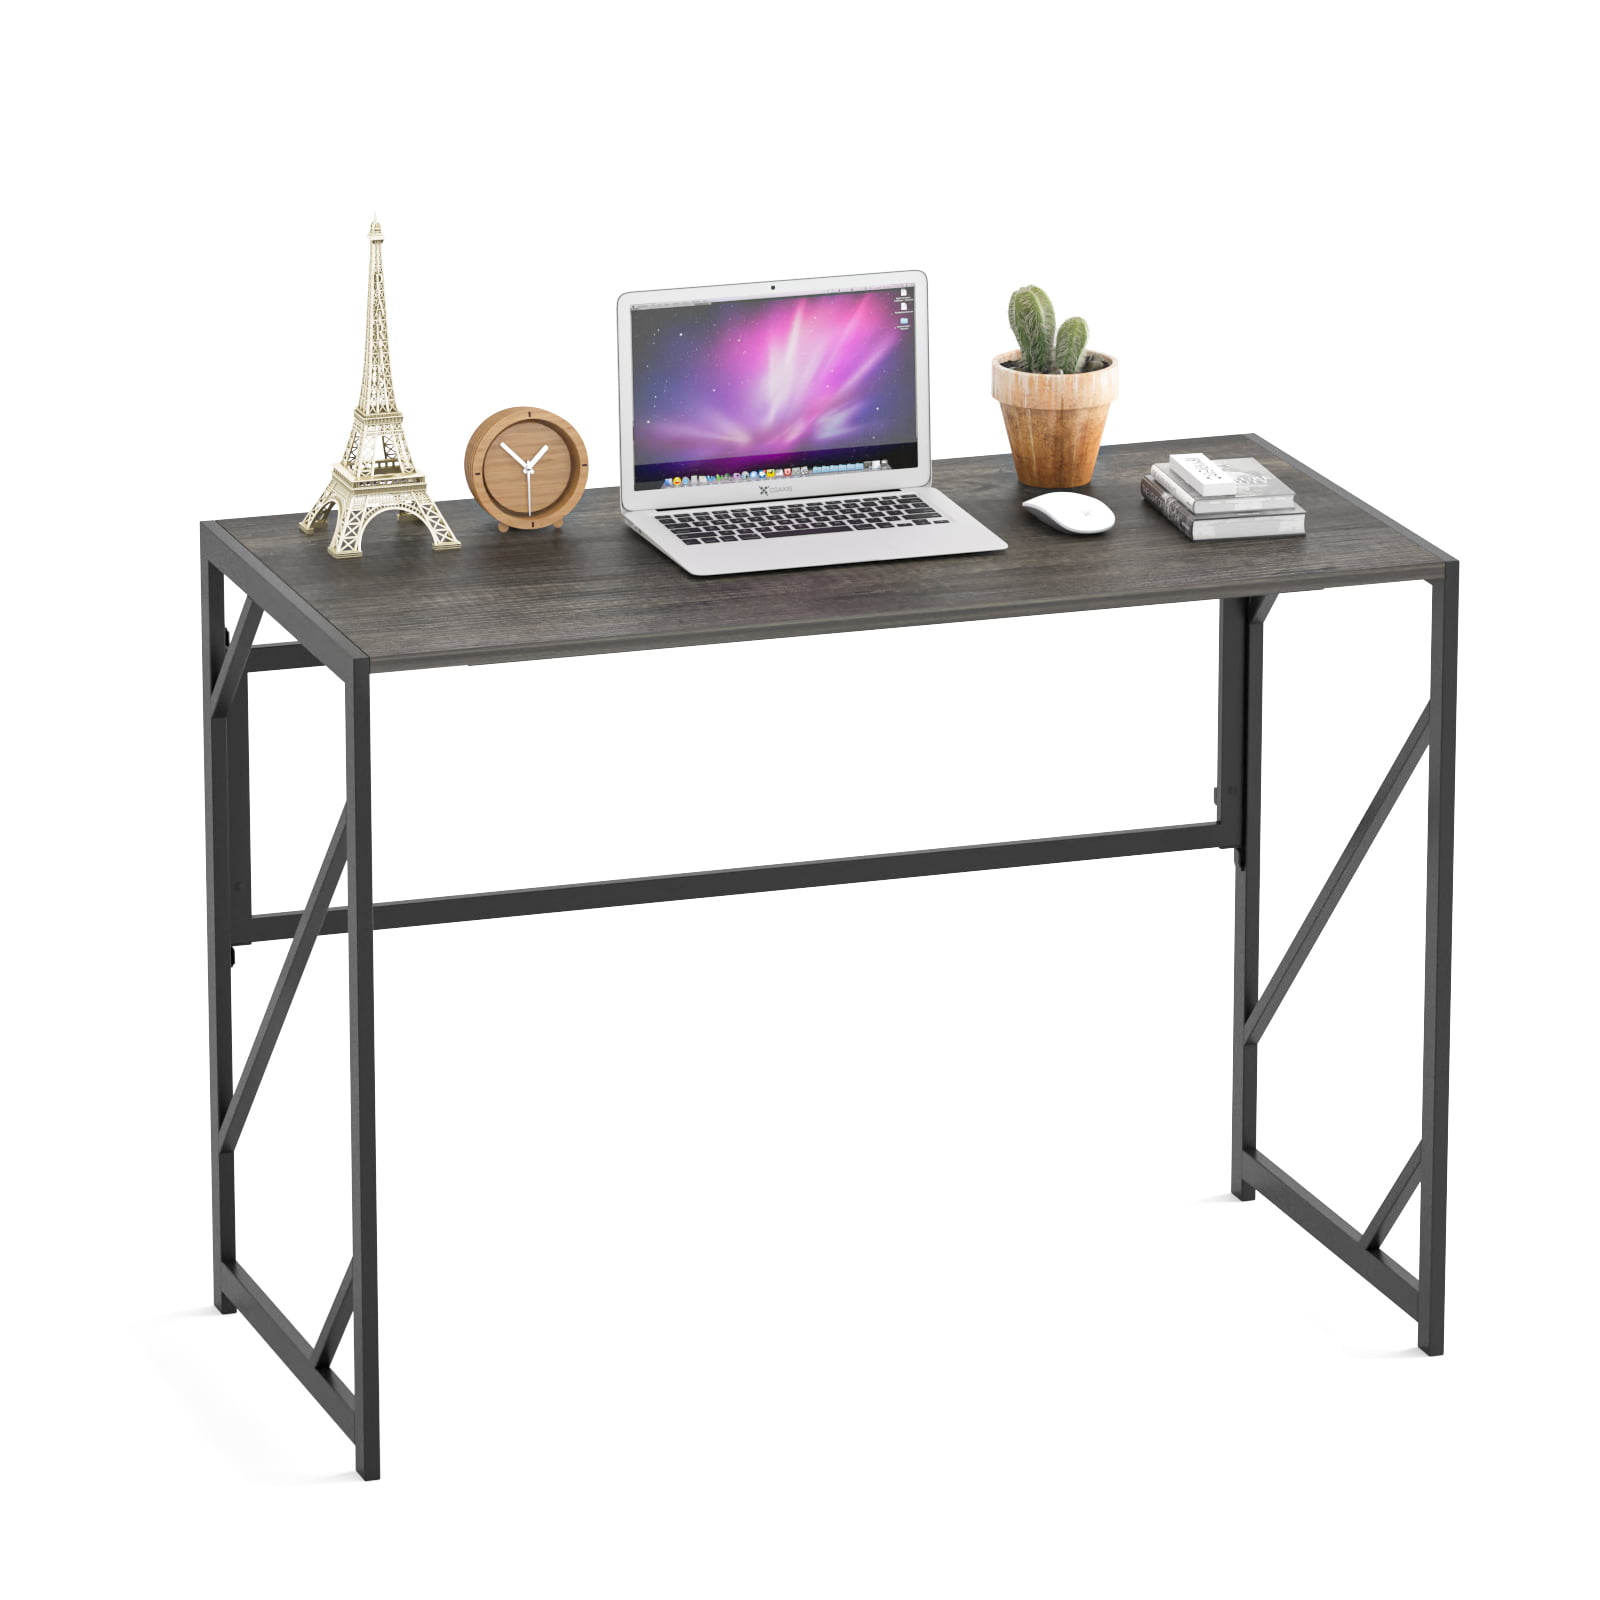 Elephance Folding Computer Desk Simple Study PC Laptop Wood Table Home  Office